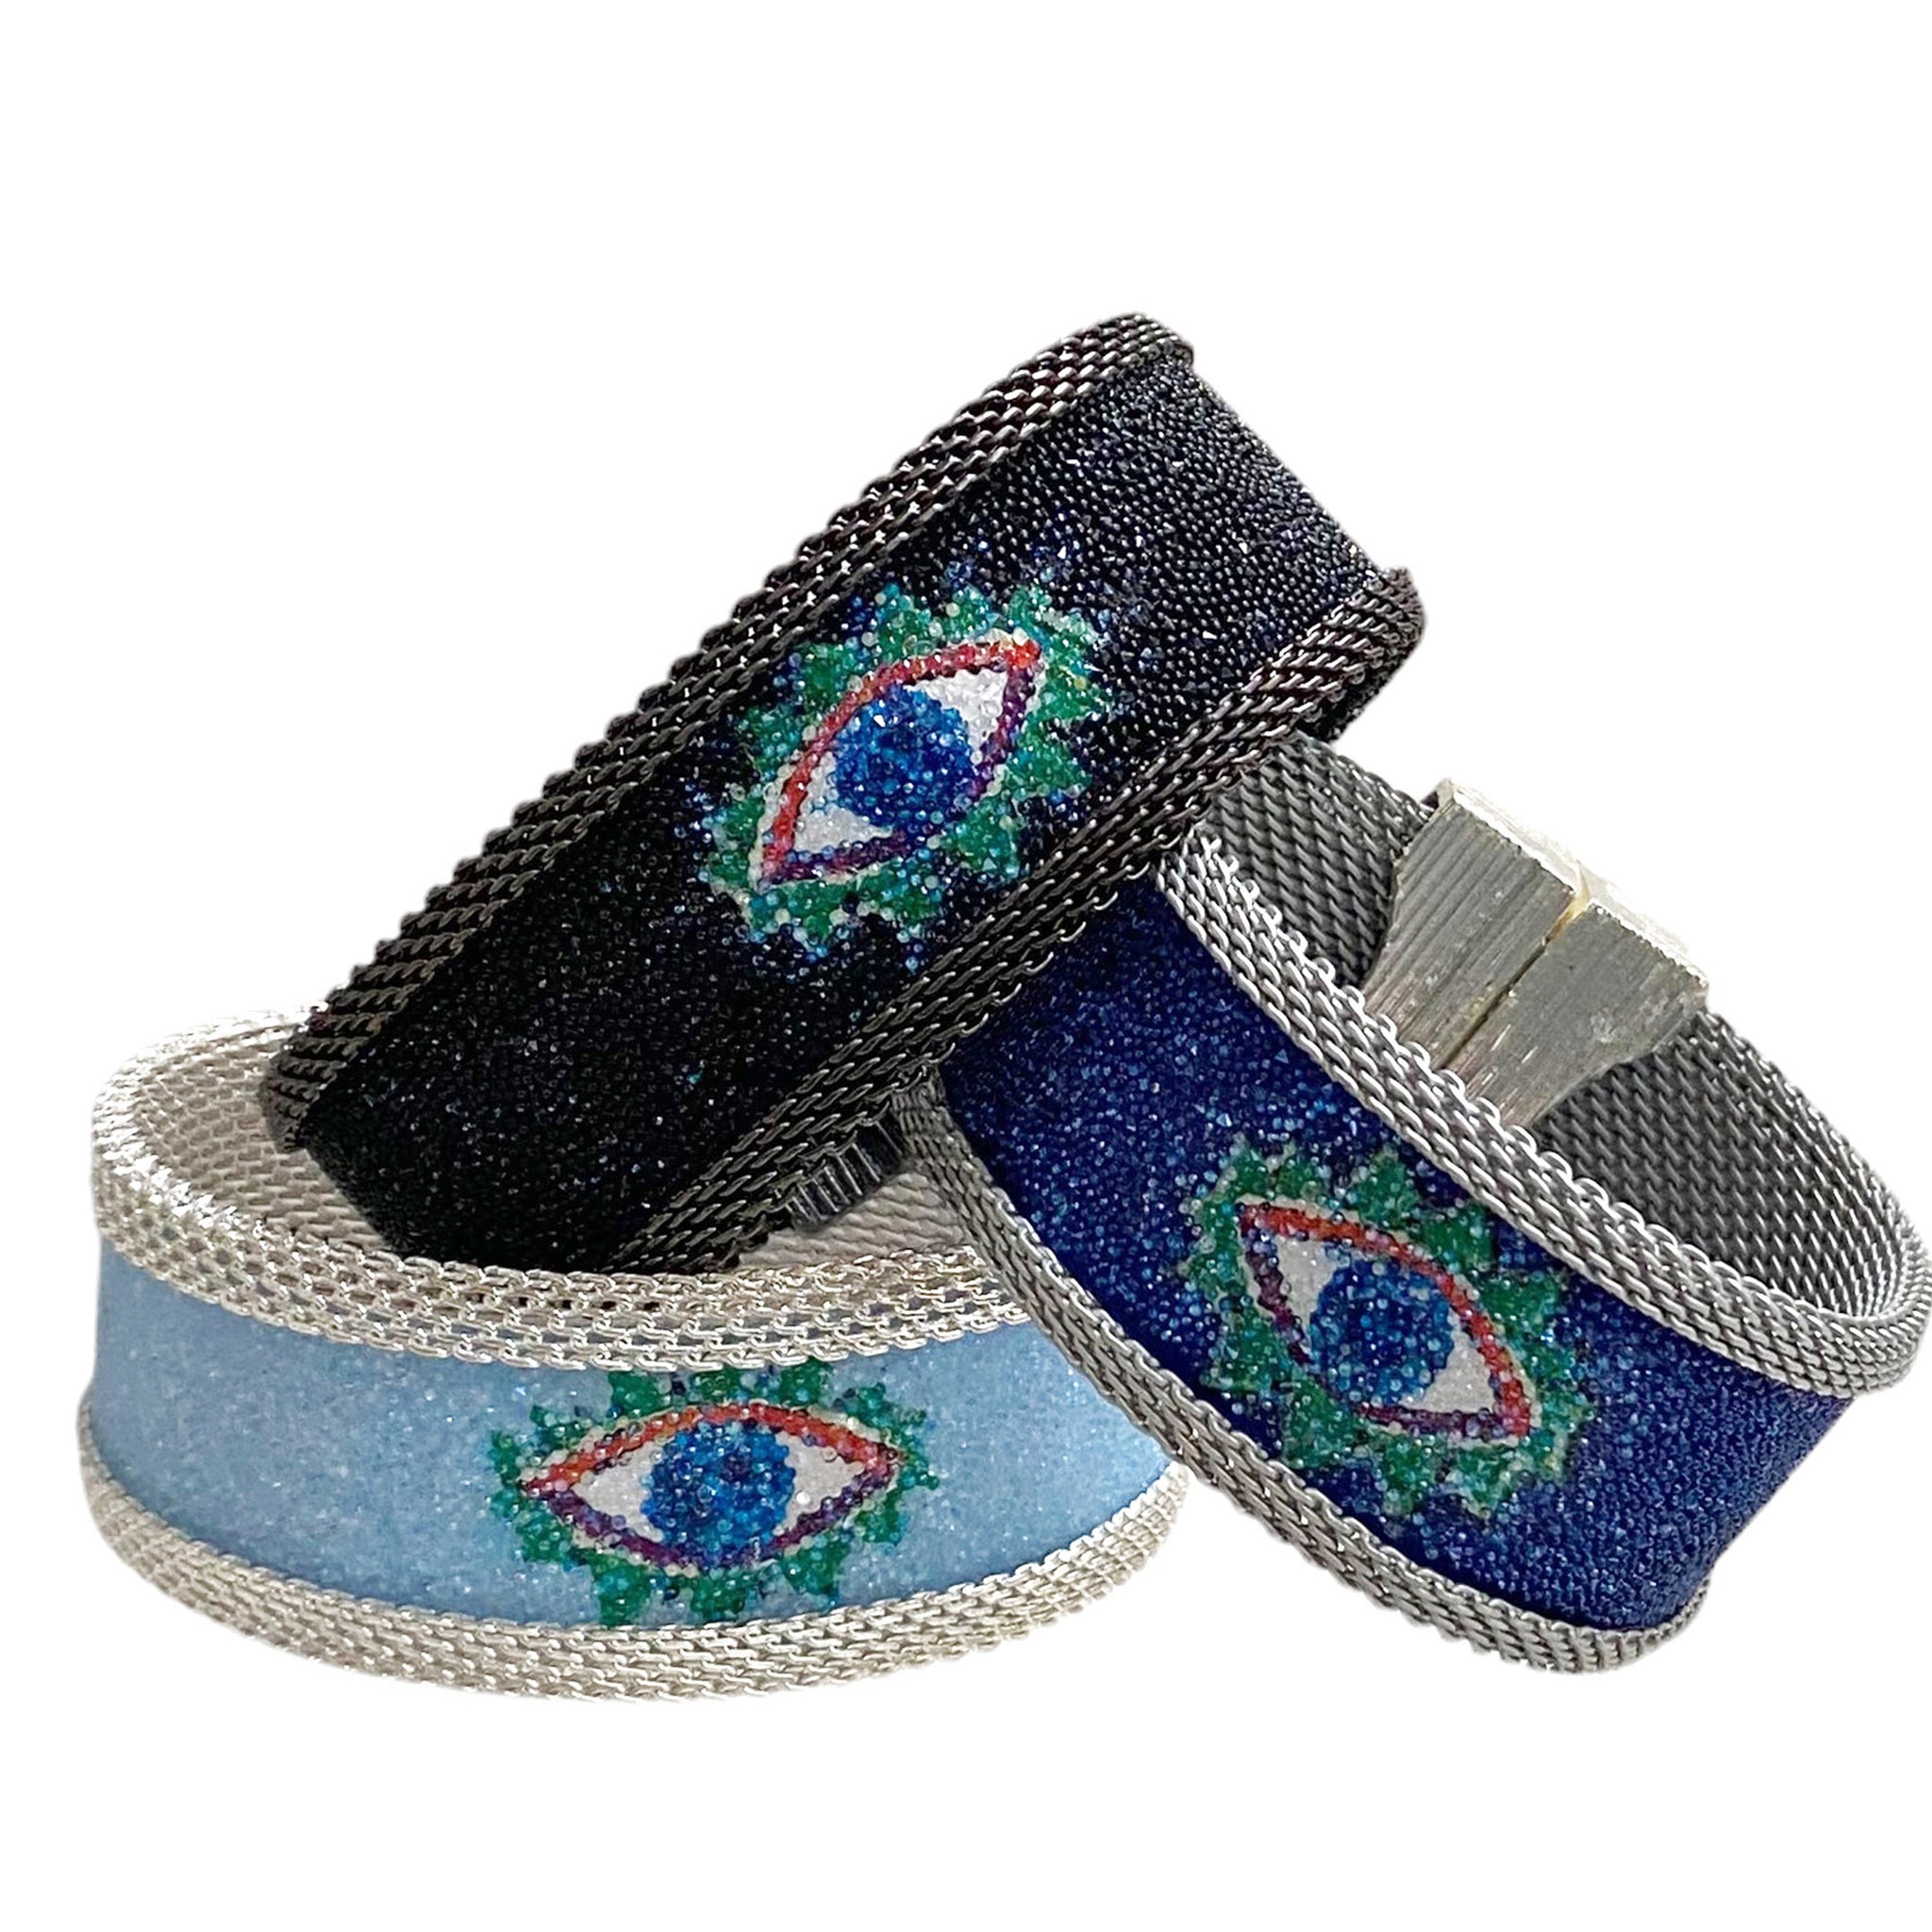 Protective Eye Cuffs with Shimmery BLUE eyes